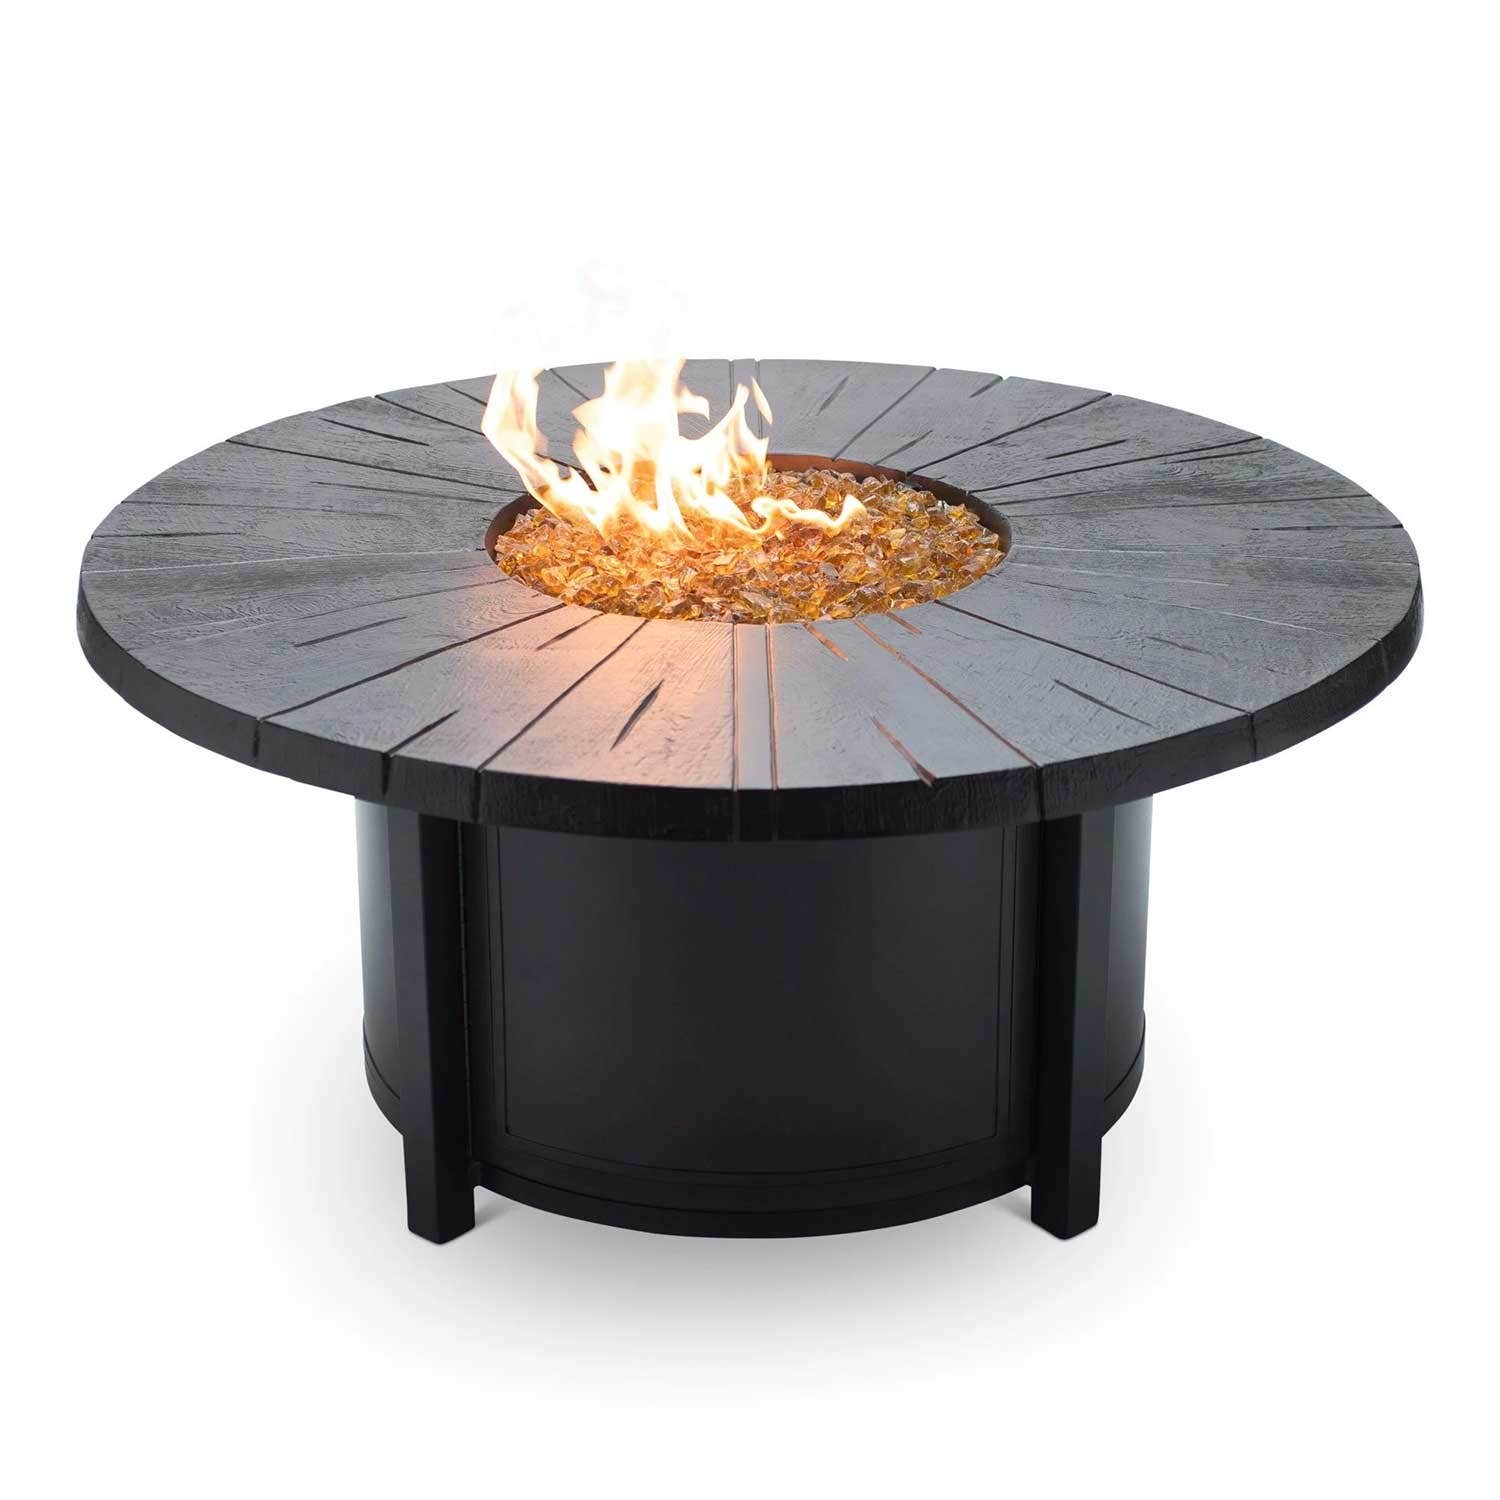 Castelle Fireplaces Castelle Altra 48 inch Round Coffee Table Fire Pit Reclaimed Timber Top and Antique Dark Rum Finish